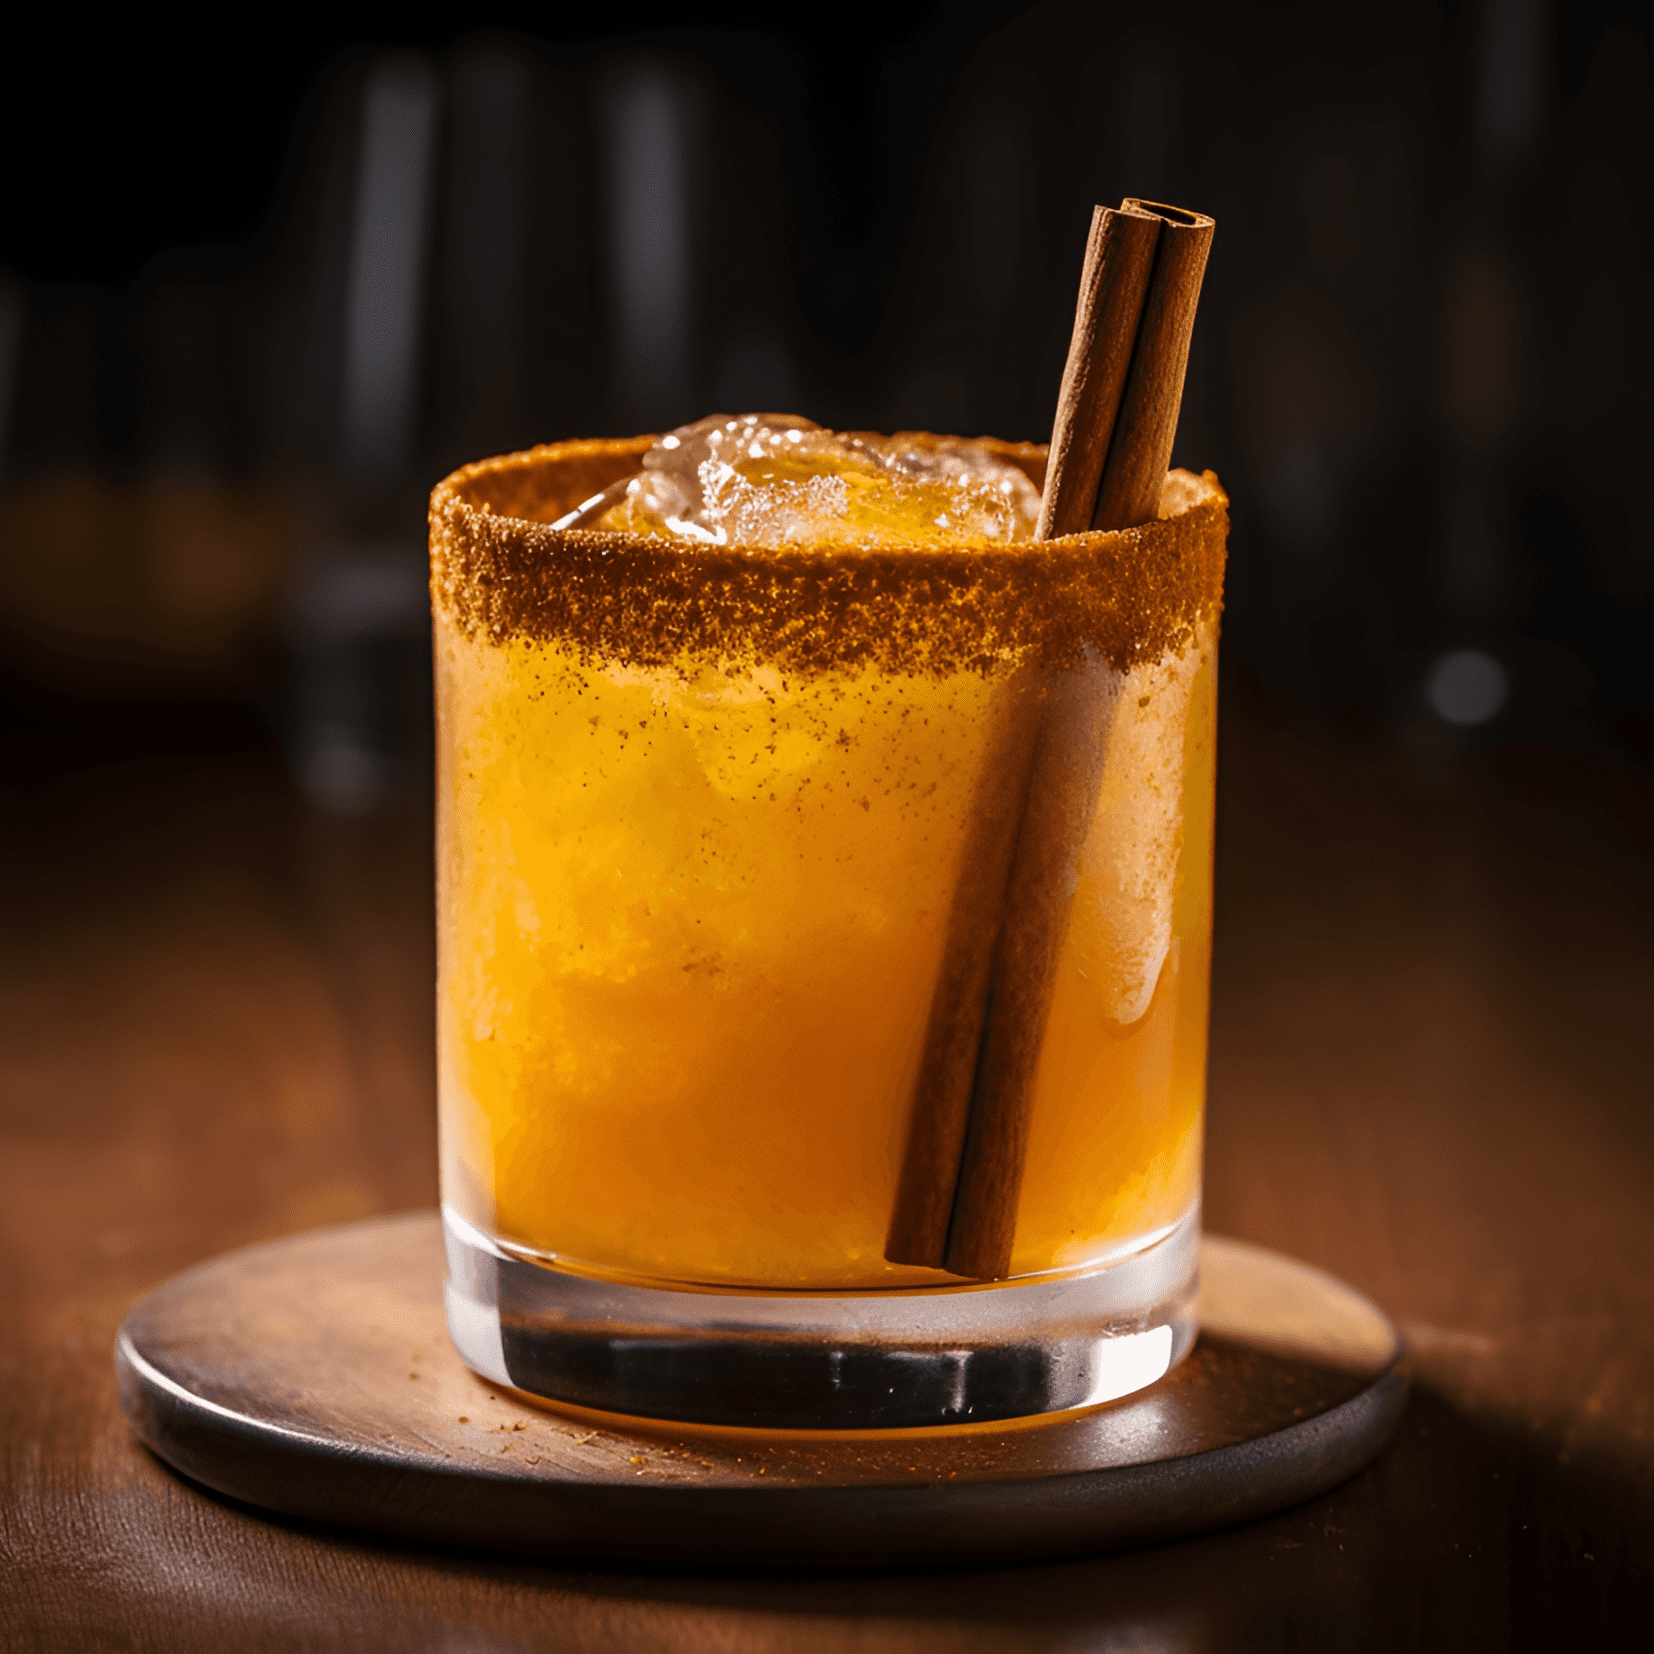 Bumbo Cocktail Recipe - Bumbo has a sweet and spicy taste, with a hint of warmth from the rum. It is smooth and rich, with a velvety texture and a lingering finish.